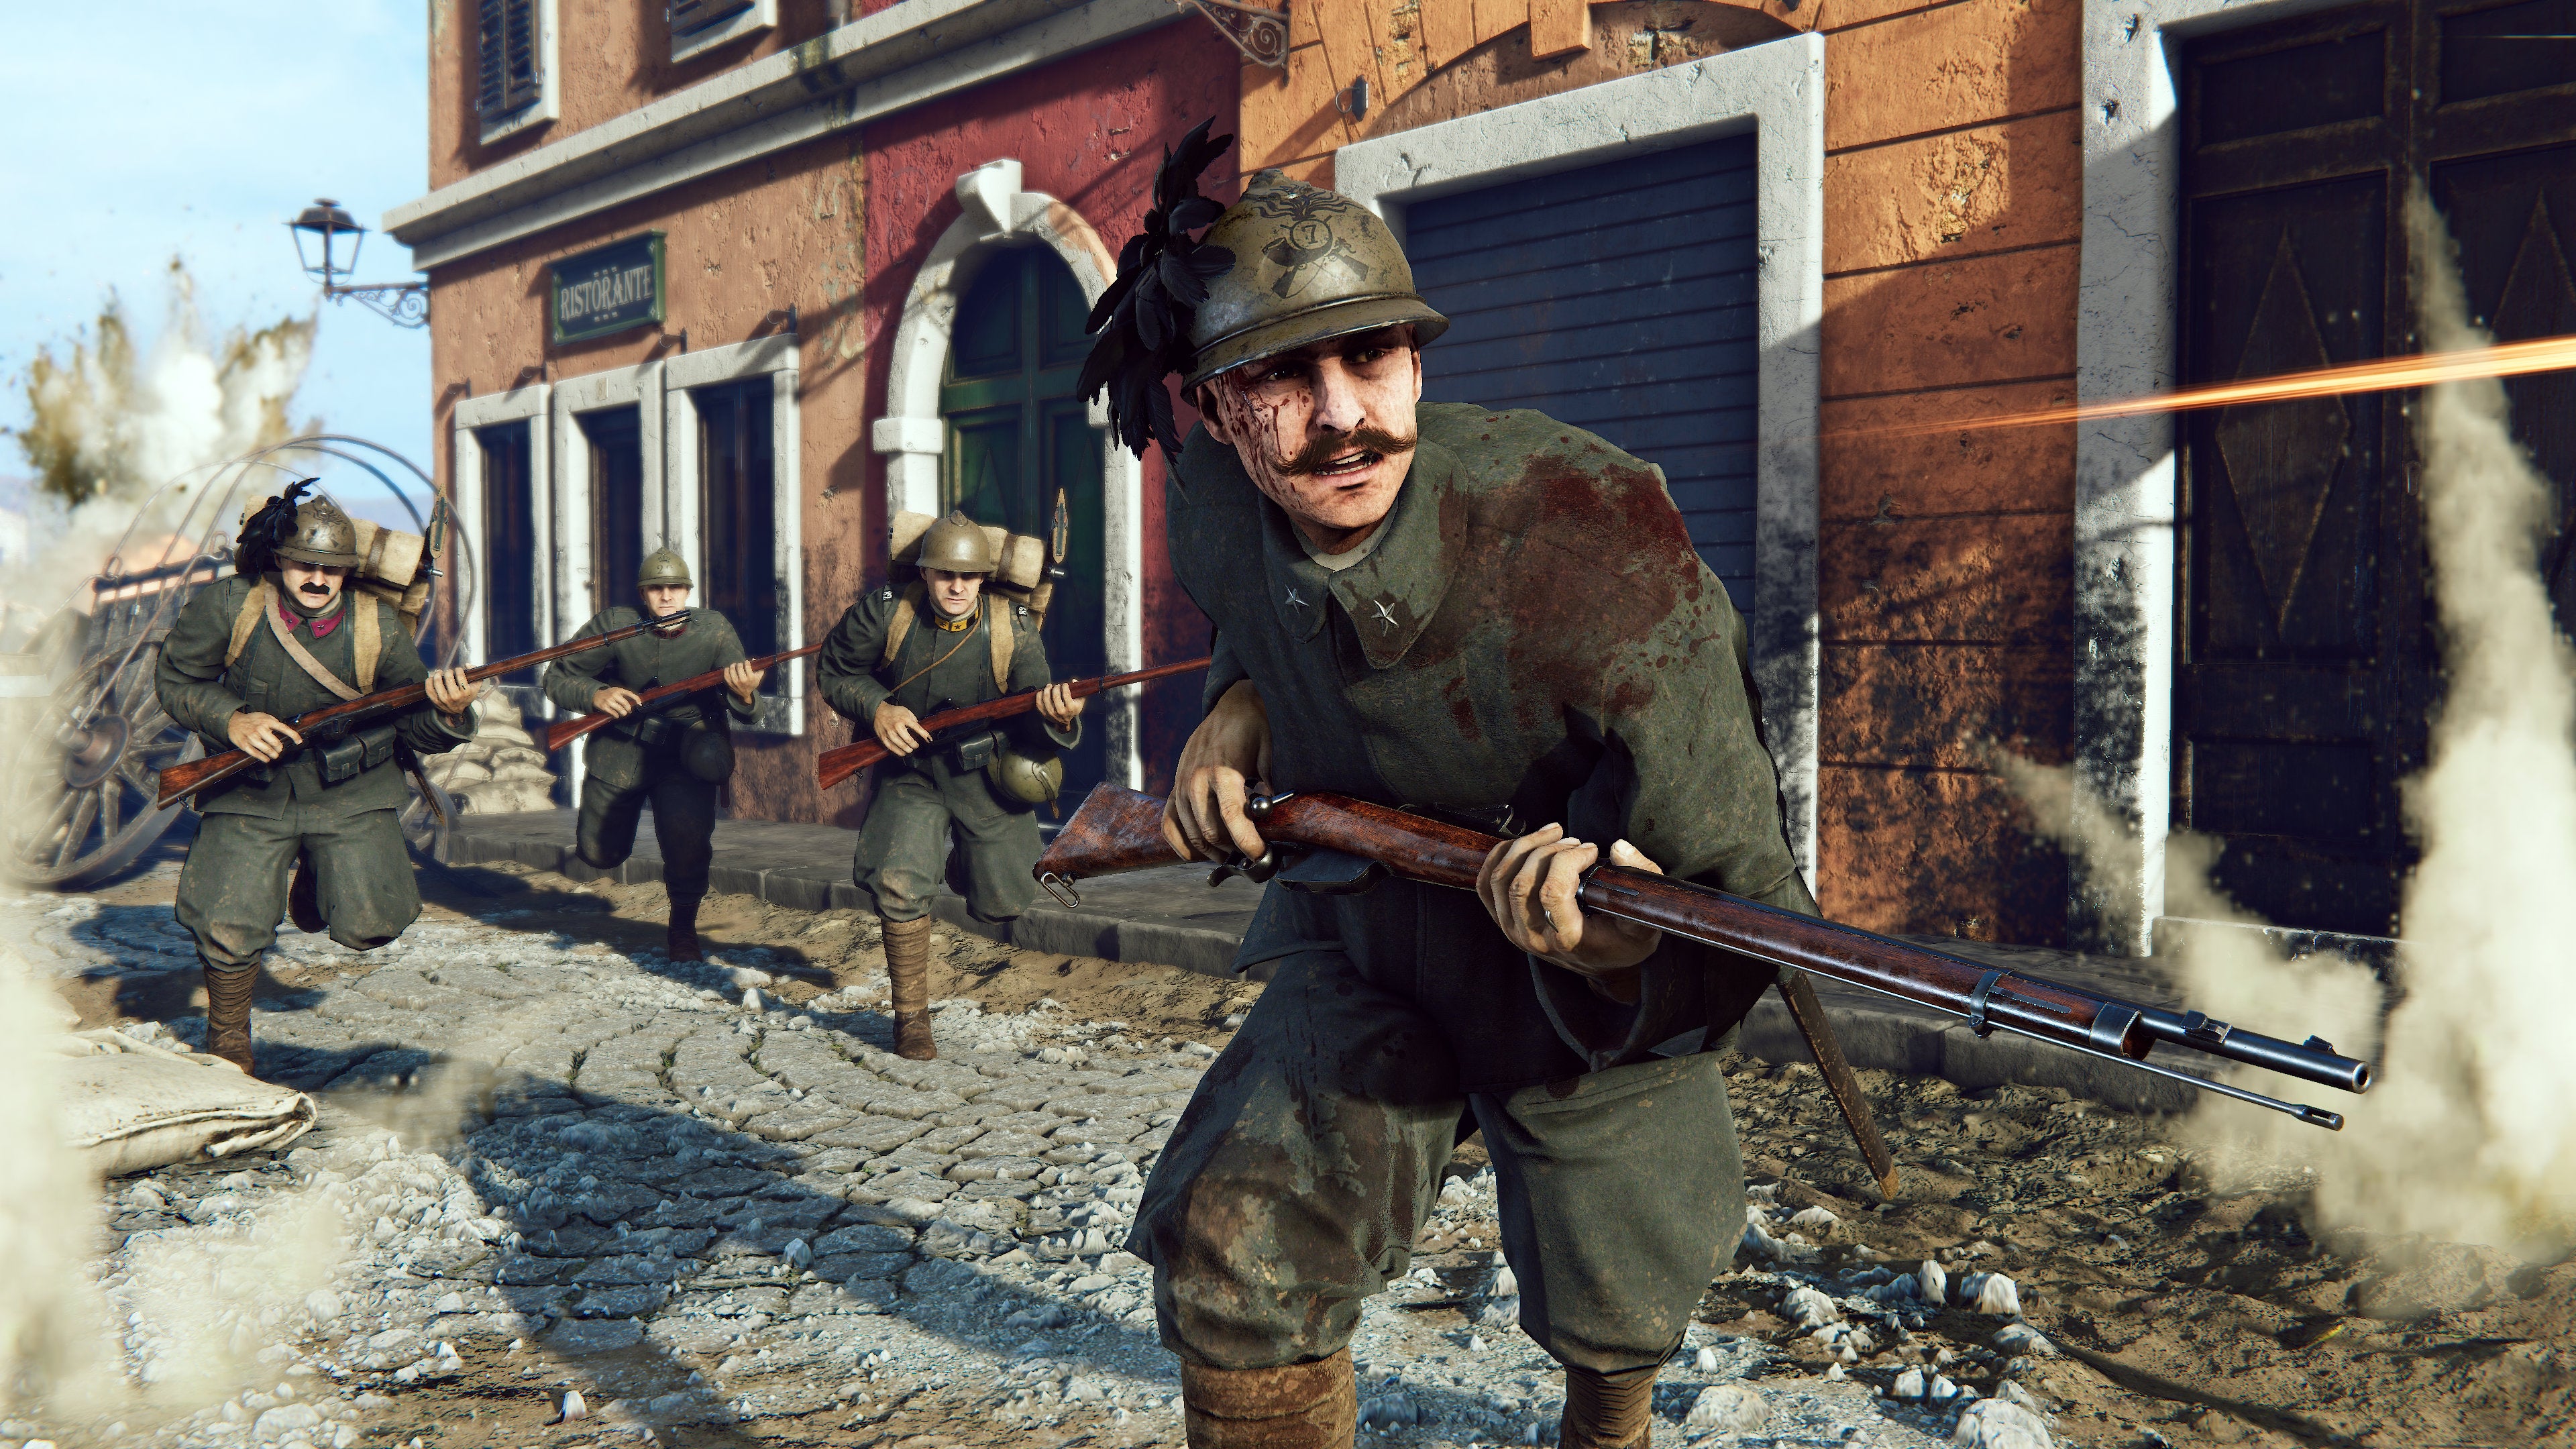 Soldiers under fire in a town in an Isonzo screenshot.